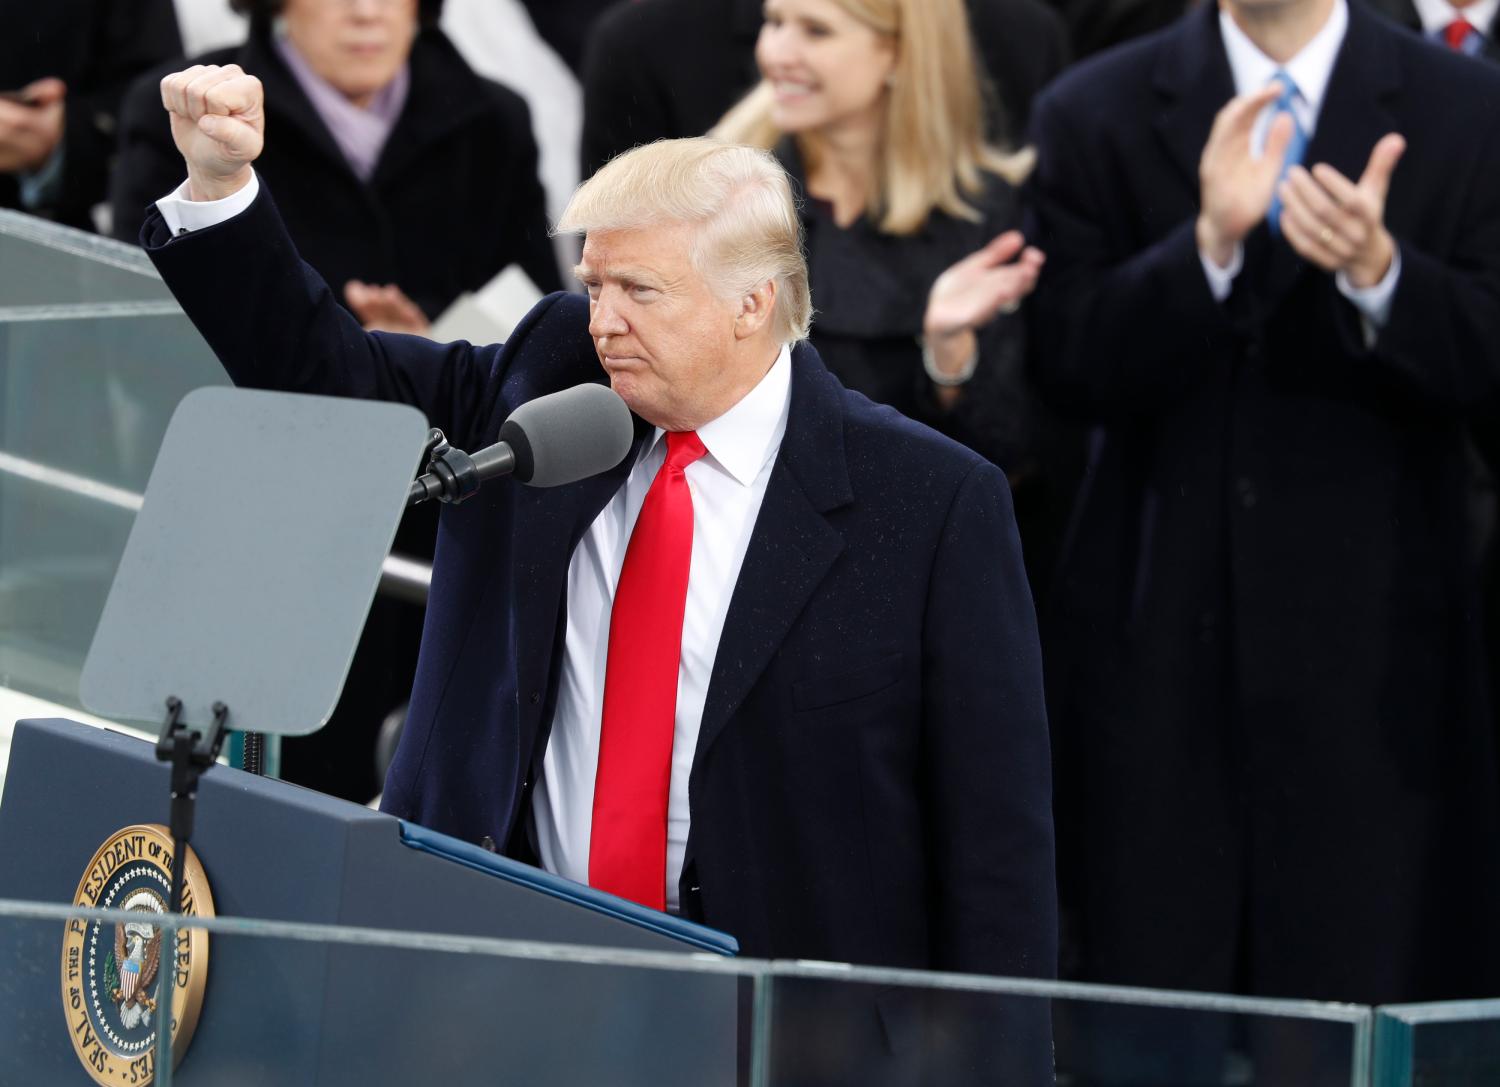 U.S. President Donald Trump gestures as he speaks after being sworn in as the 45th president of the United States on the West front of the U.S. Capitol in Washington, U.S., January 20, 2017. REUTERS/Lucy Nicholson